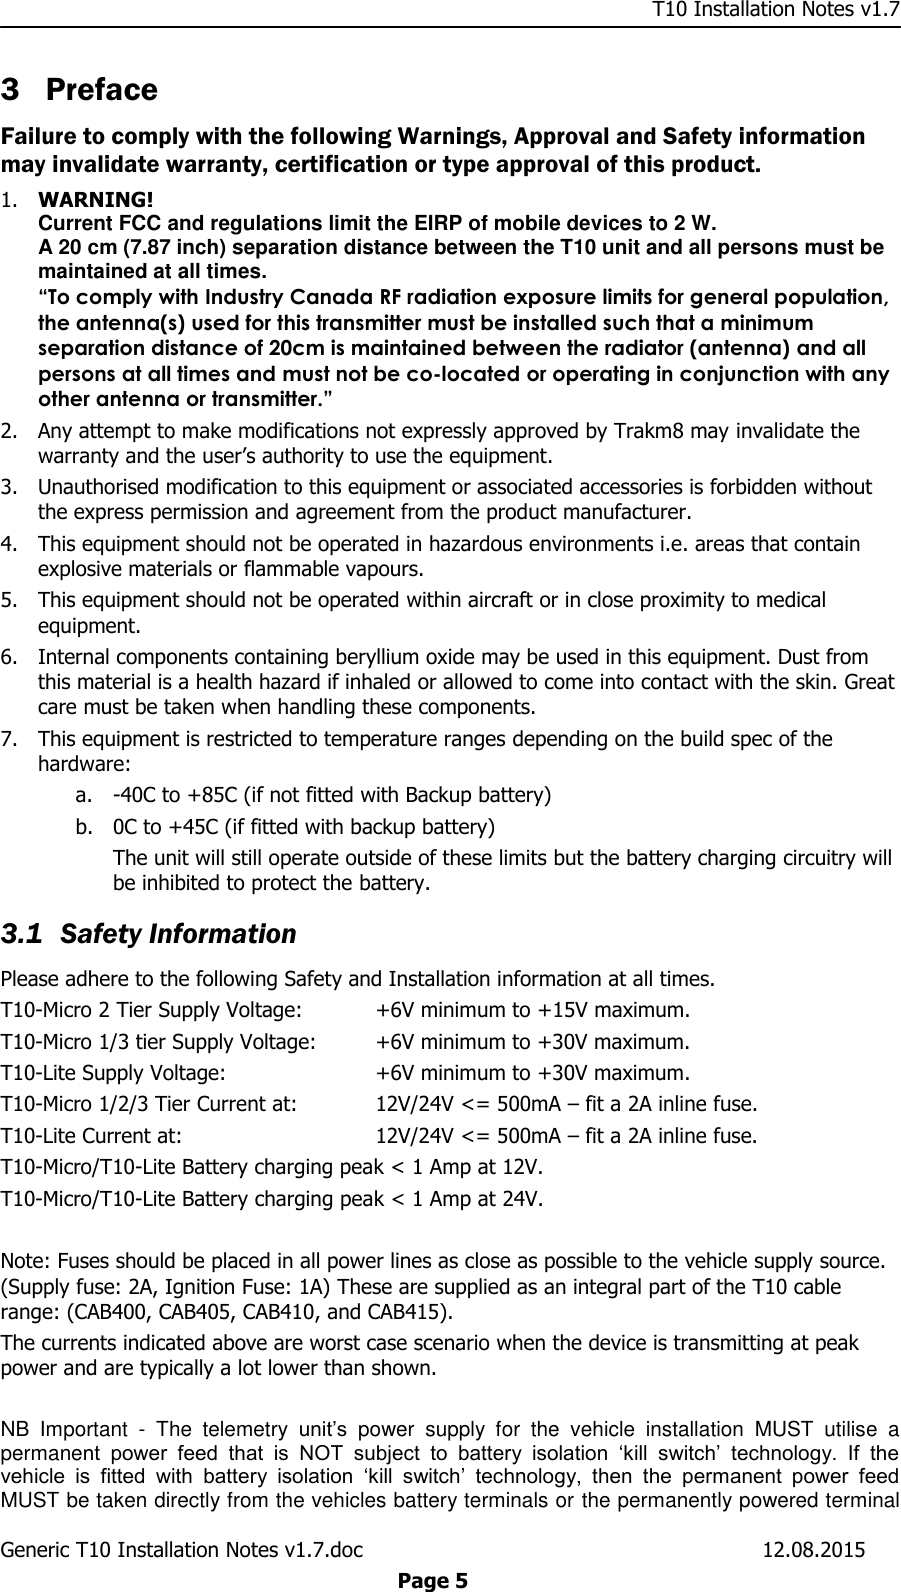     T10 Installation Notes v1.7 Generic T10 Installation Notes v1.7.doc    12.08.2015  Page 5 3 Preface Failure to comply with the following Warnings, Approval and Safety information may invalidate warranty, certification or type approval of this product. 1. WARNING! Current FCC and regulations limit the EIRP of mobile devices to 2 W.  A 20 cm (7.87 inch) separation distance between the T10 unit and all persons must be maintained at all times. “To comply with Industry Canada RF radiation exposure limits for general population, the antenna(s) used for this transmitter must be installed such that a minimum separation distance of 20cm is maintained between the radiator (antenna) and all persons at all times and must not be co-located or operating in conjunction with any other antenna or transmitter.” 2. Any attempt to make modifications not expressly approved by Trakm8 may invalidate the warranty and the user’s authority to use the equipment. 3. Unauthorised modification to this equipment or associated accessories is forbidden without the express permission and agreement from the product manufacturer. 4. This equipment should not be operated in hazardous environments i.e. areas that contain explosive materials or flammable vapours. 5. This equipment should not be operated within aircraft or in close proximity to medical equipment. 6. Internal components containing beryllium oxide may be used in this equipment. Dust from this material is a health hazard if inhaled or allowed to come into contact with the skin. Great care must be taken when handling these components.  7. This equipment is restricted to temperature ranges depending on the build spec of the hardware: a. -40C to +85C (if not fitted with Backup battery) b. 0C to +45C (if fitted with backup battery) The unit will still operate outside of these limits but the battery charging circuitry will be inhibited to protect the battery. 3.1 Safety Information Please adhere to the following Safety and Installation information at all times. T10-Micro 2 Tier Supply Voltage:  +6V minimum to +15V maximum. T10-Micro 1/3 tier Supply Voltage:  +6V minimum to +30V maximum. T10-Lite Supply Voltage:    +6V minimum to +30V maximum. T10-Micro 1/2/3 Tier Current at:   12V/24V &lt;= 500mA – fit a 2A inline fuse. T10-Lite Current at:      12V/24V &lt;= 500mA – fit a 2A inline fuse. T10-Micro/T10-Lite Battery charging peak &lt; 1 Amp at 12V. T10-Micro/T10-Lite Battery charging peak &lt; 1 Amp at 24V.  Note: Fuses should be placed in all power lines as close as possible to the vehicle supply source. (Supply fuse: 2A, Ignition Fuse: 1A) These are supplied as an integral part of the T10 cable range: (CAB400, CAB405, CAB410, and CAB415). The currents indicated above are worst case scenario when the device is transmitting at peak power and are typically a lot lower than shown.  NB  Important  -  The  telemetry  unit’s  power  supply  for  the  vehicle  installation  MUST  utilise  a permanent  power  feed  that  is  NOT  subject  to  battery  isolation  ‘kill  switch’  technology.  If  the vehicle  is  fitted  with  battery  isolation  ‘kill  switch’  technology,  then  the  permanent  power  feed MUST be taken directly from the vehicles battery terminals or the permanently powered terminal 